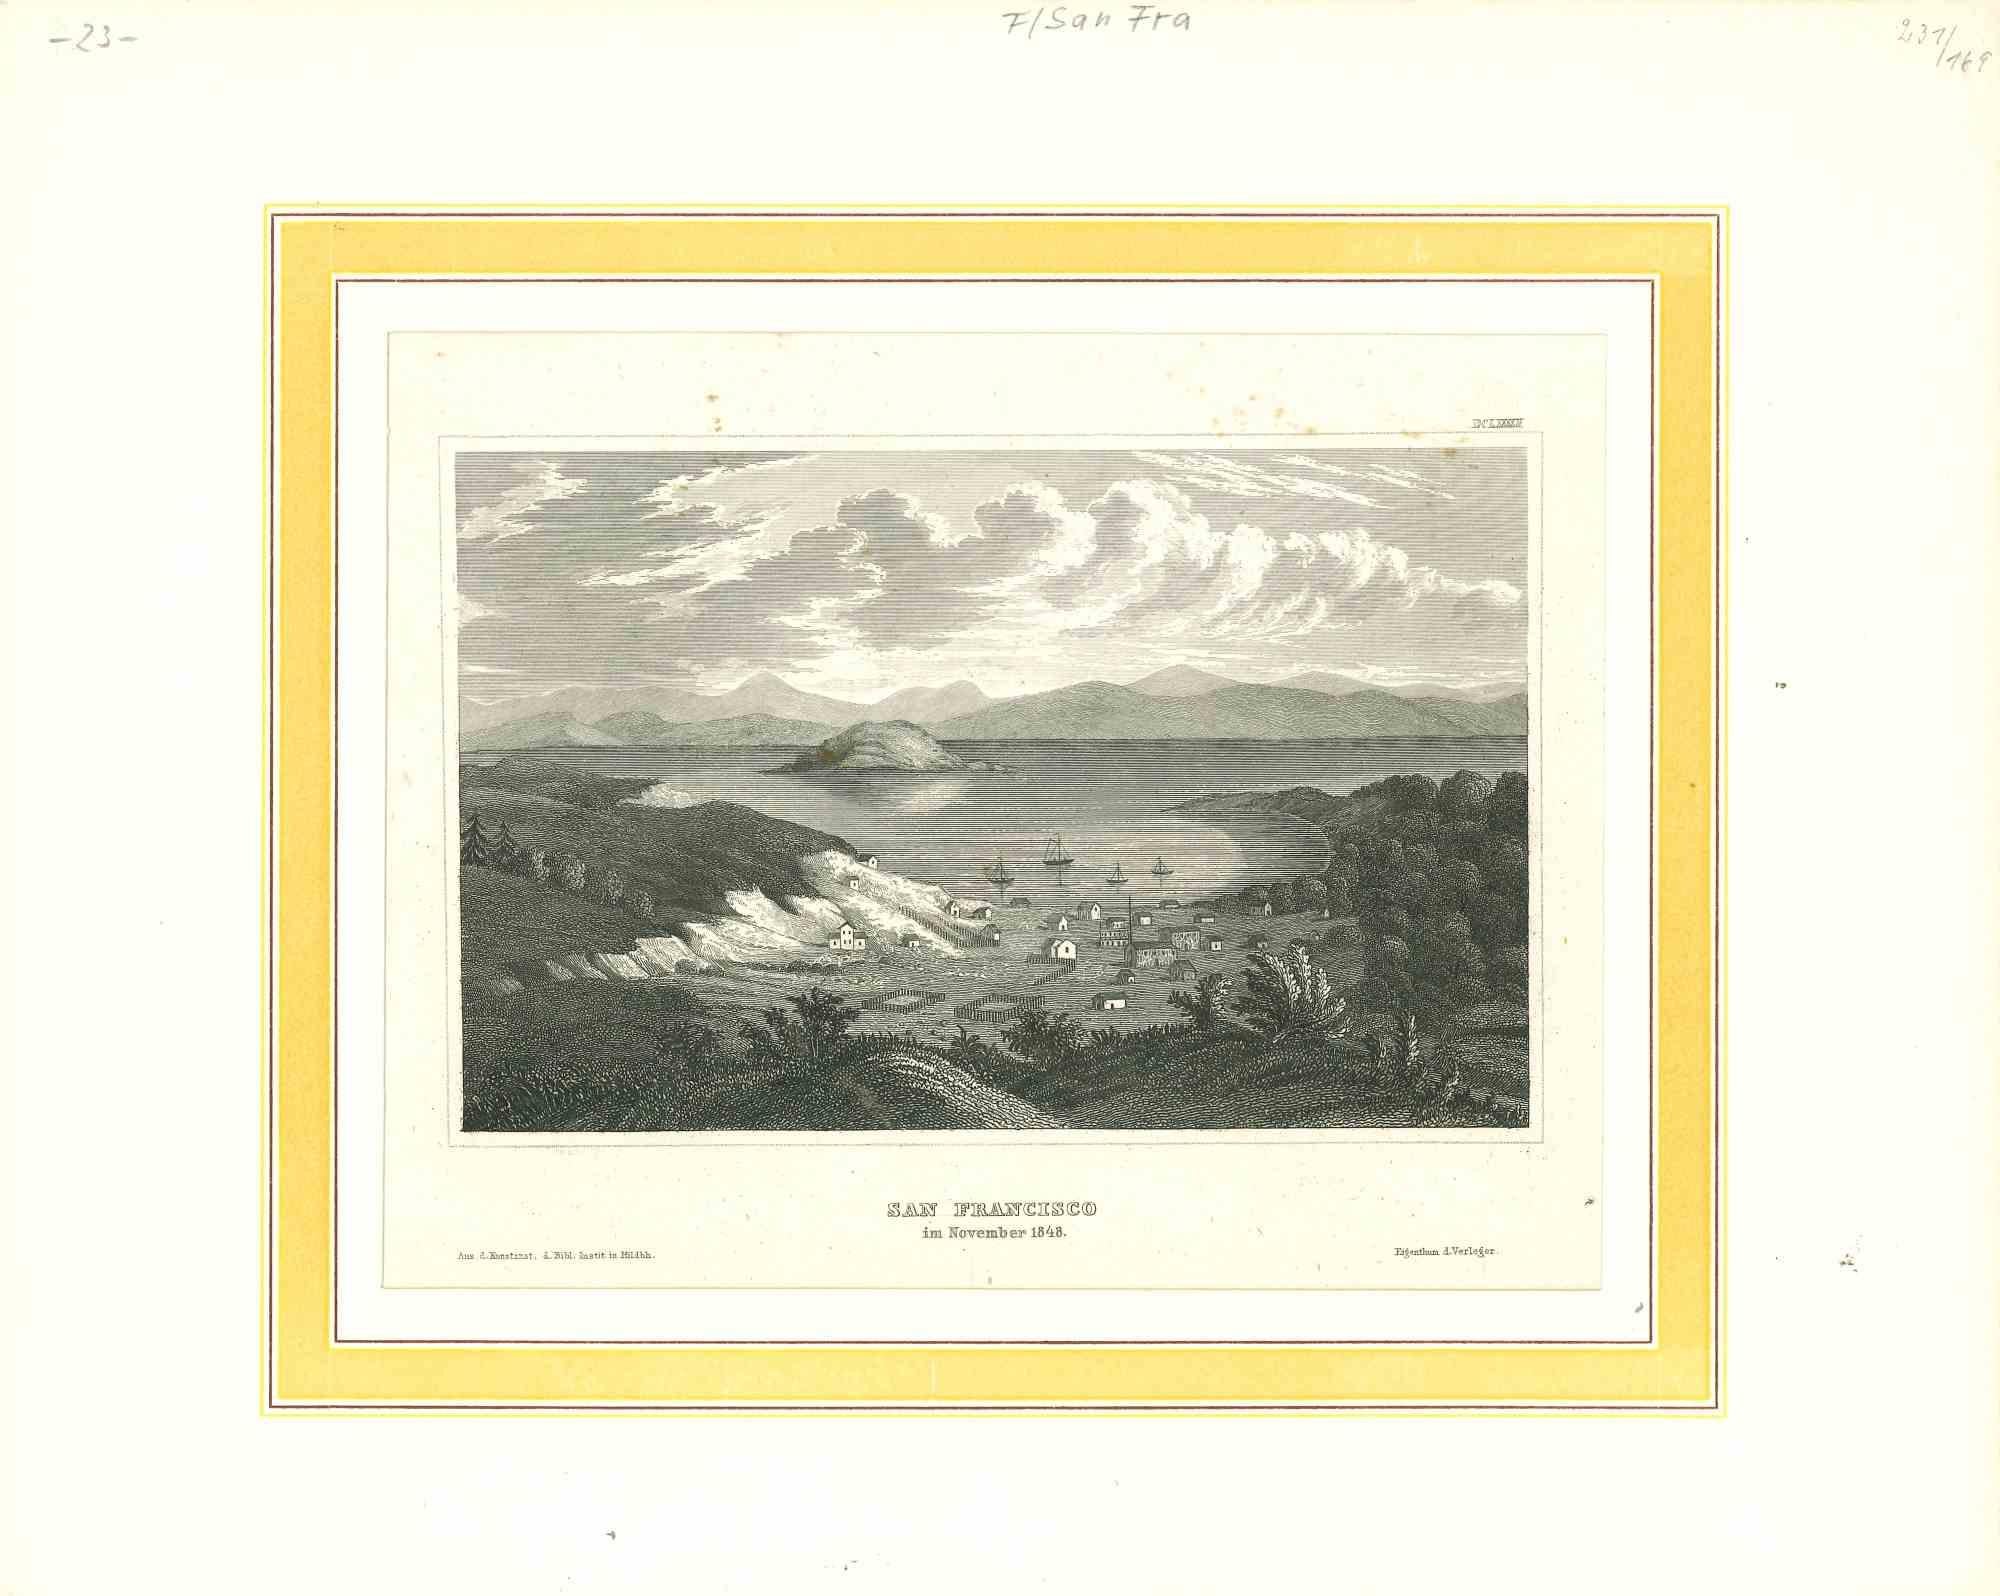 Unknown Landscape Print - Ancient View of San Francisco in November 1848 - Original Lithograph - 1850s